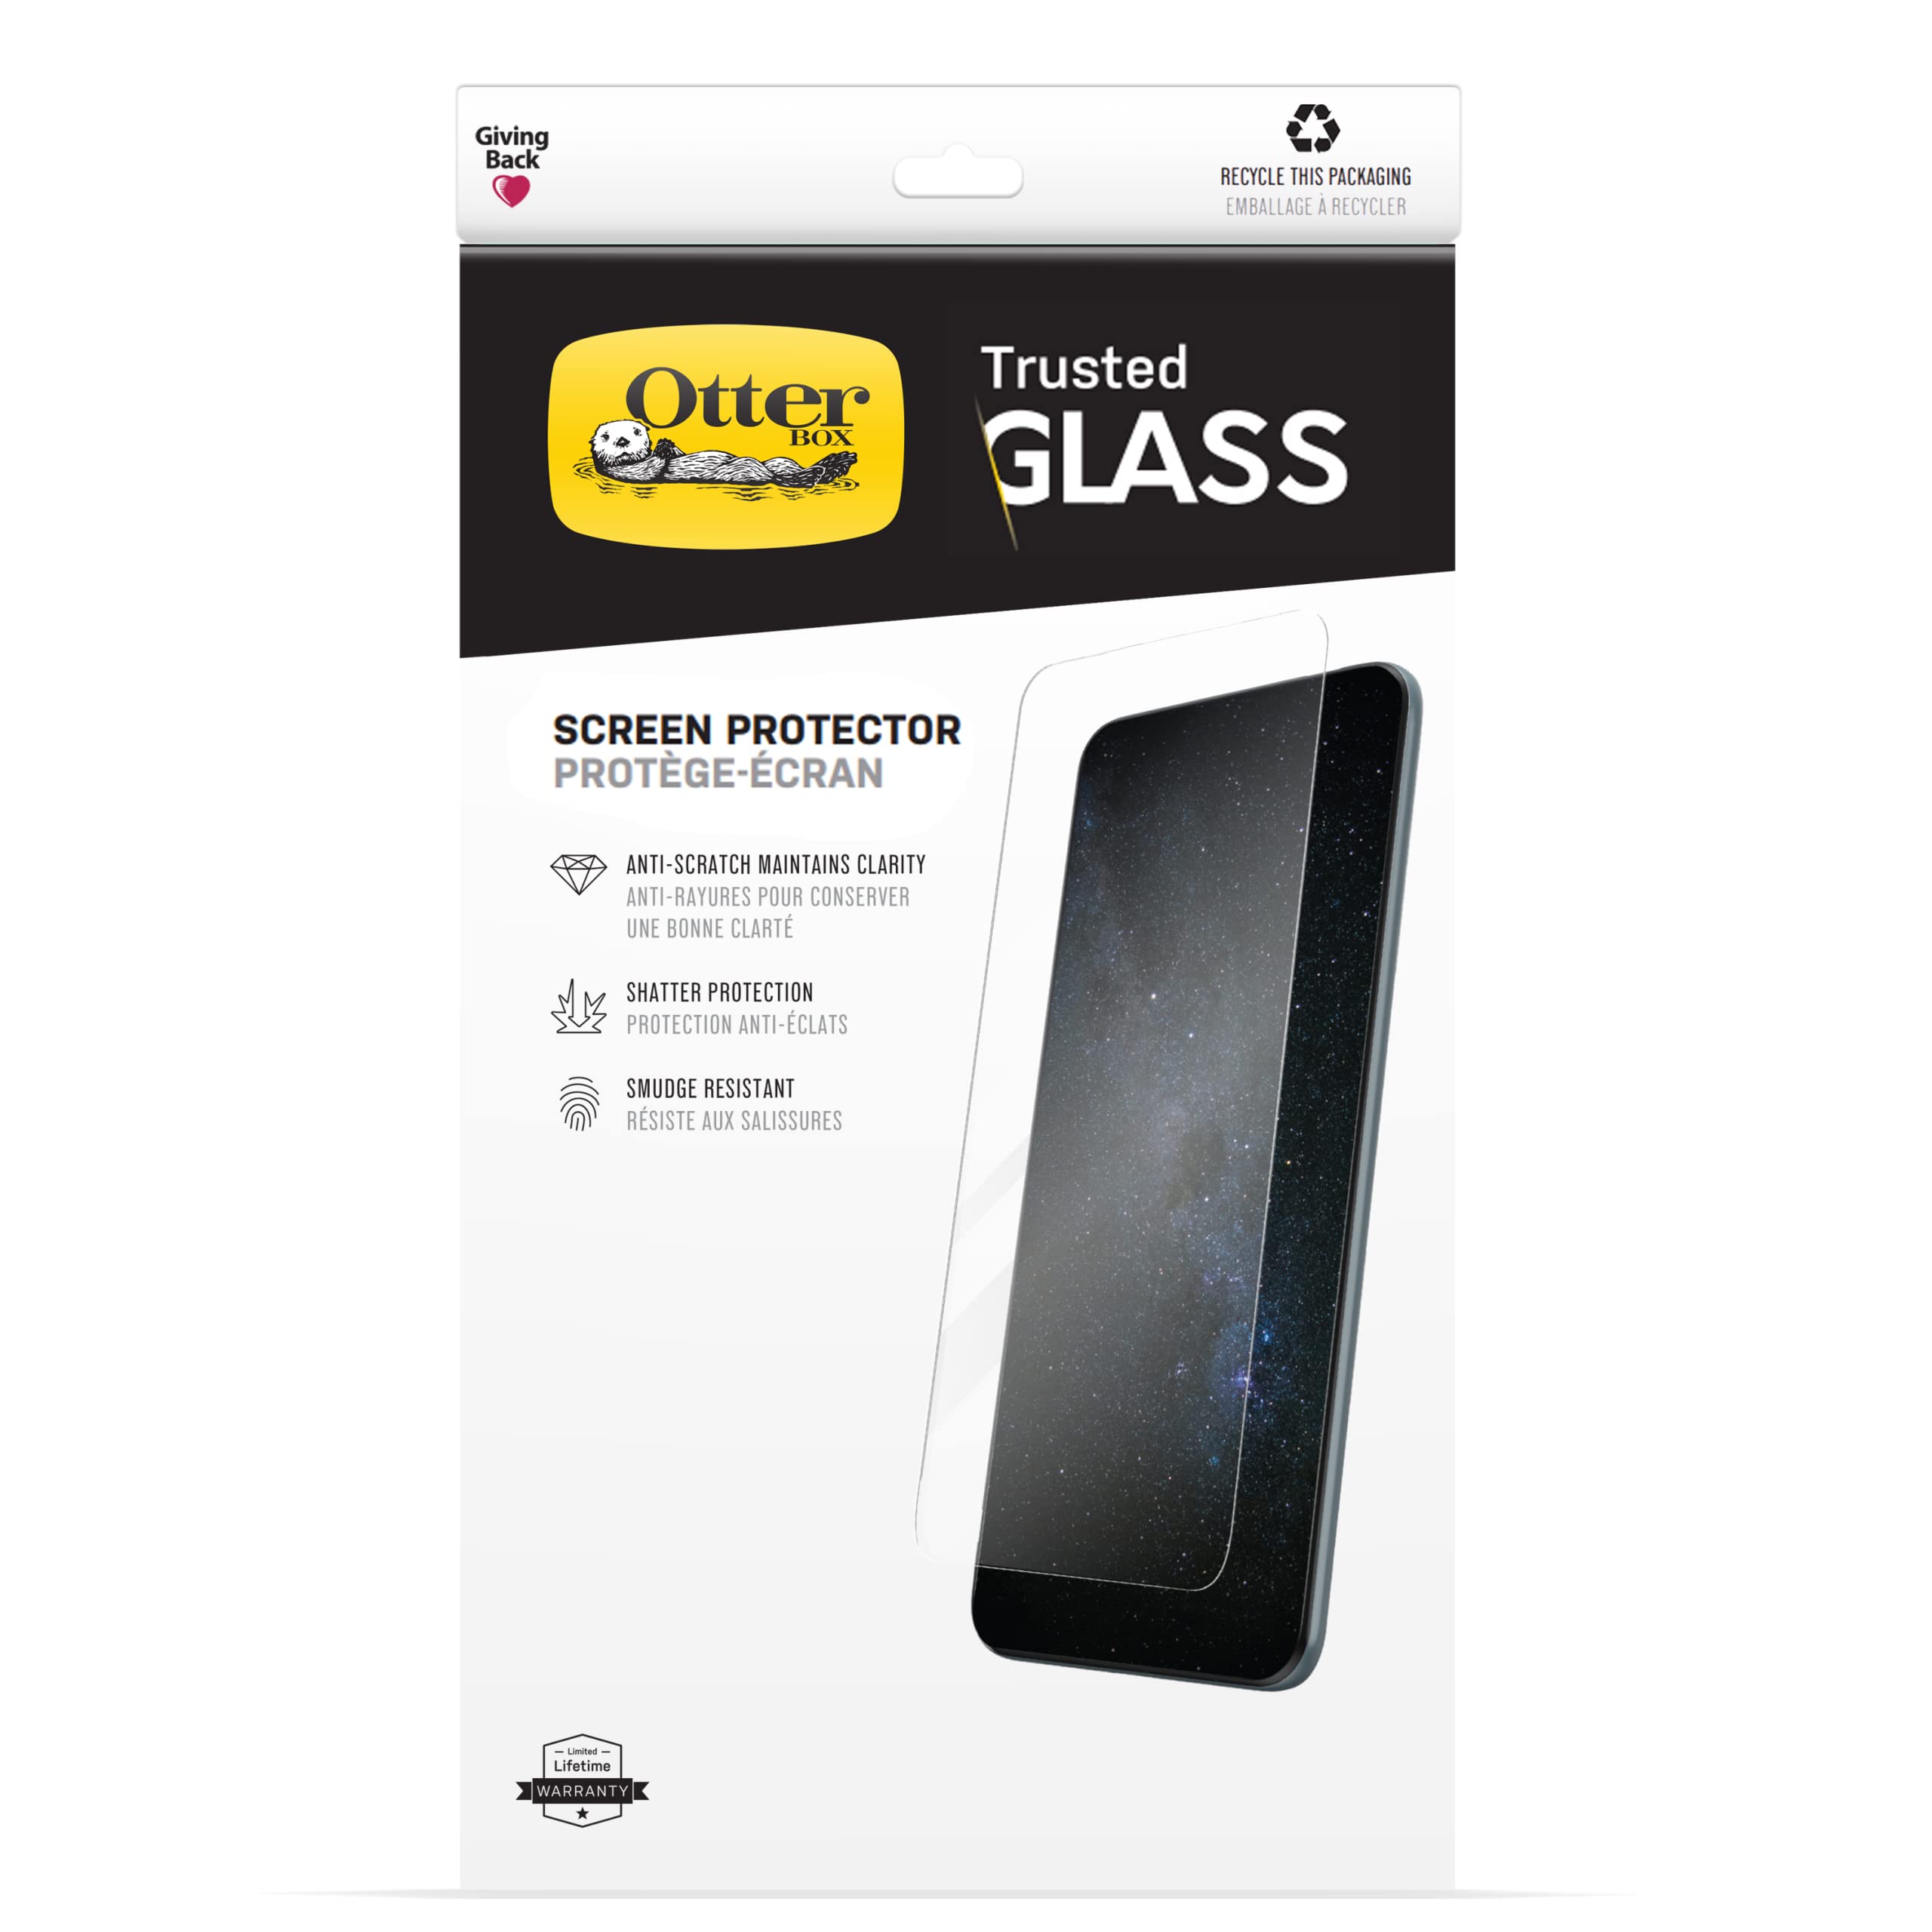 OTTERBOX TRUSTED GLASS SAMSUNG